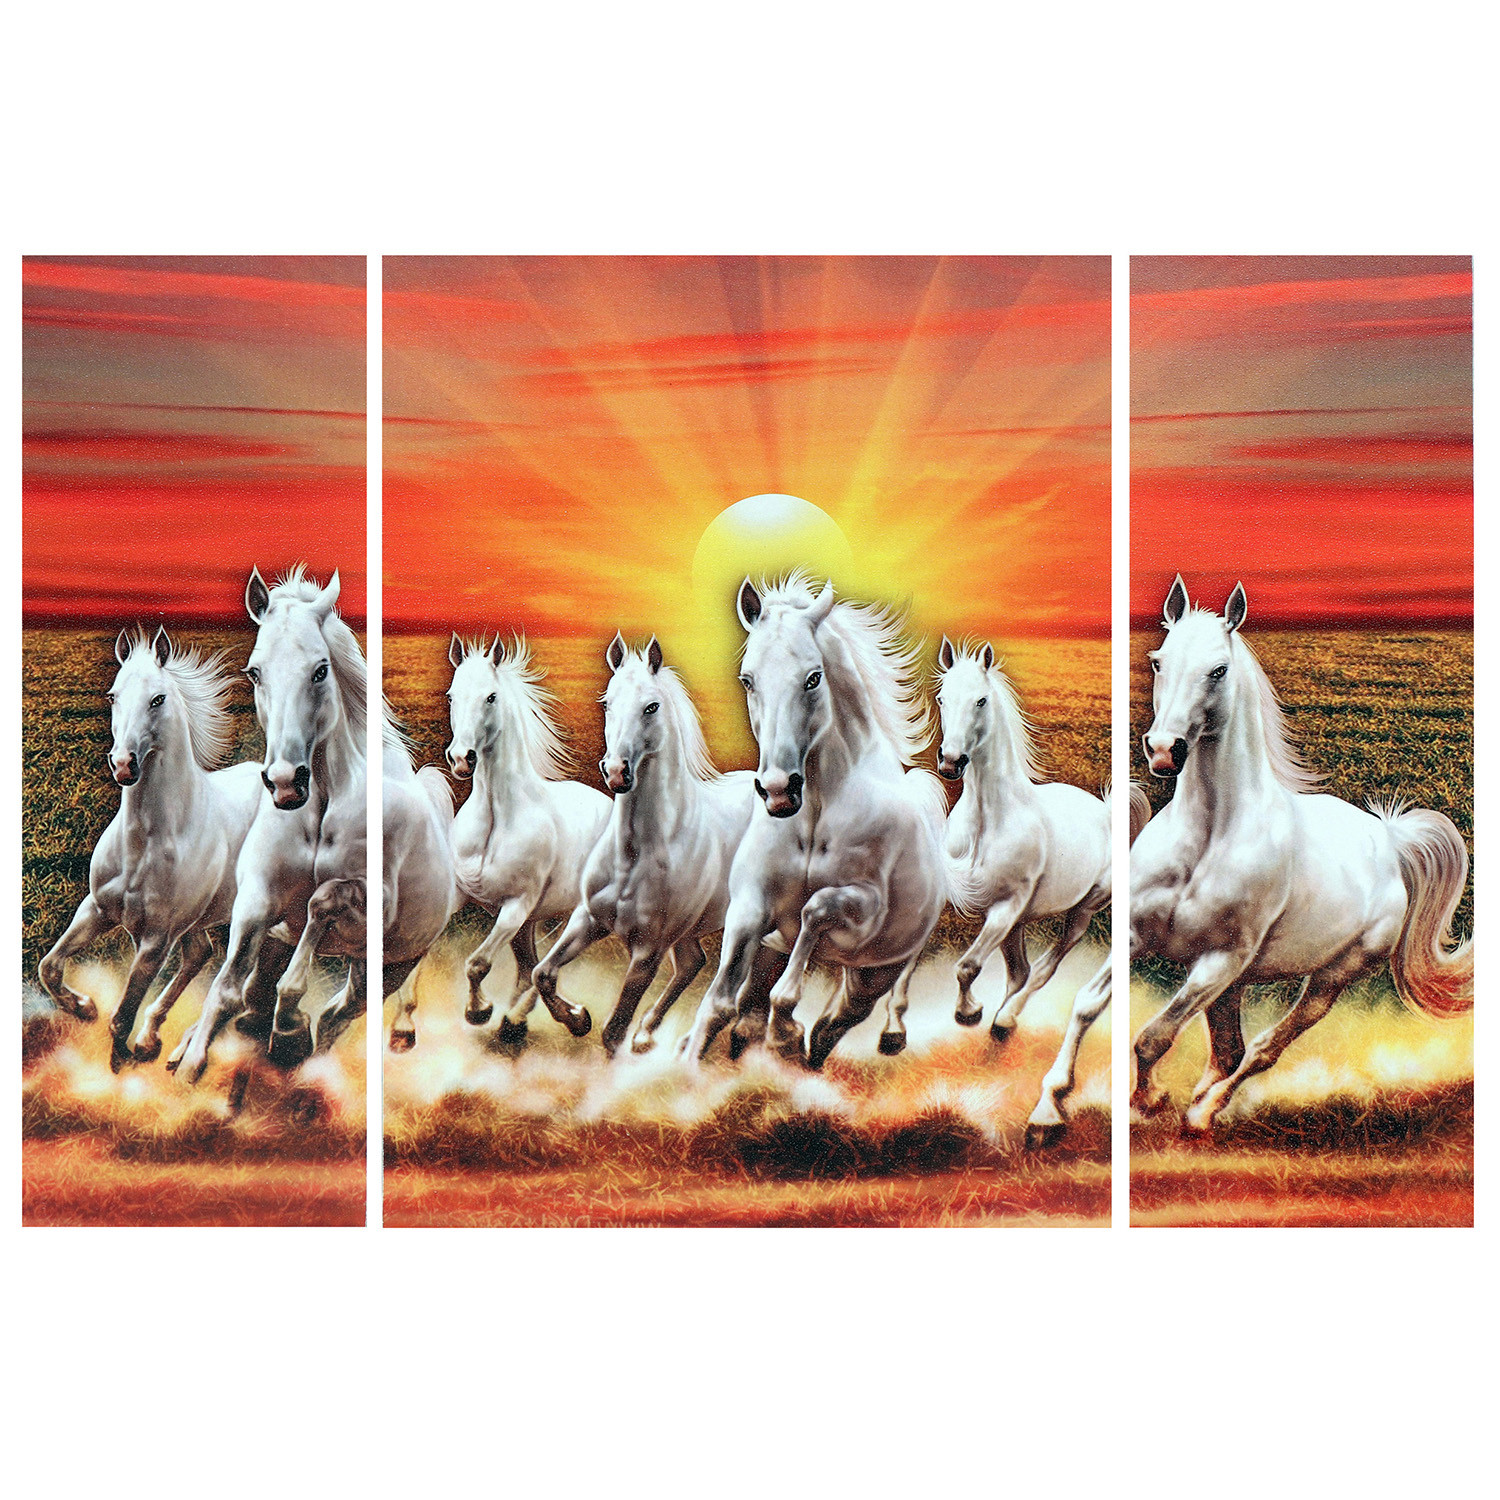 Kuber Industries Wall Paintings | MDF Wooden Wall Art for Living Room |Wall Sculpture | Horse Painting for Bedroom | Office | Hotels | Gift | 1218KIH1 | Orange